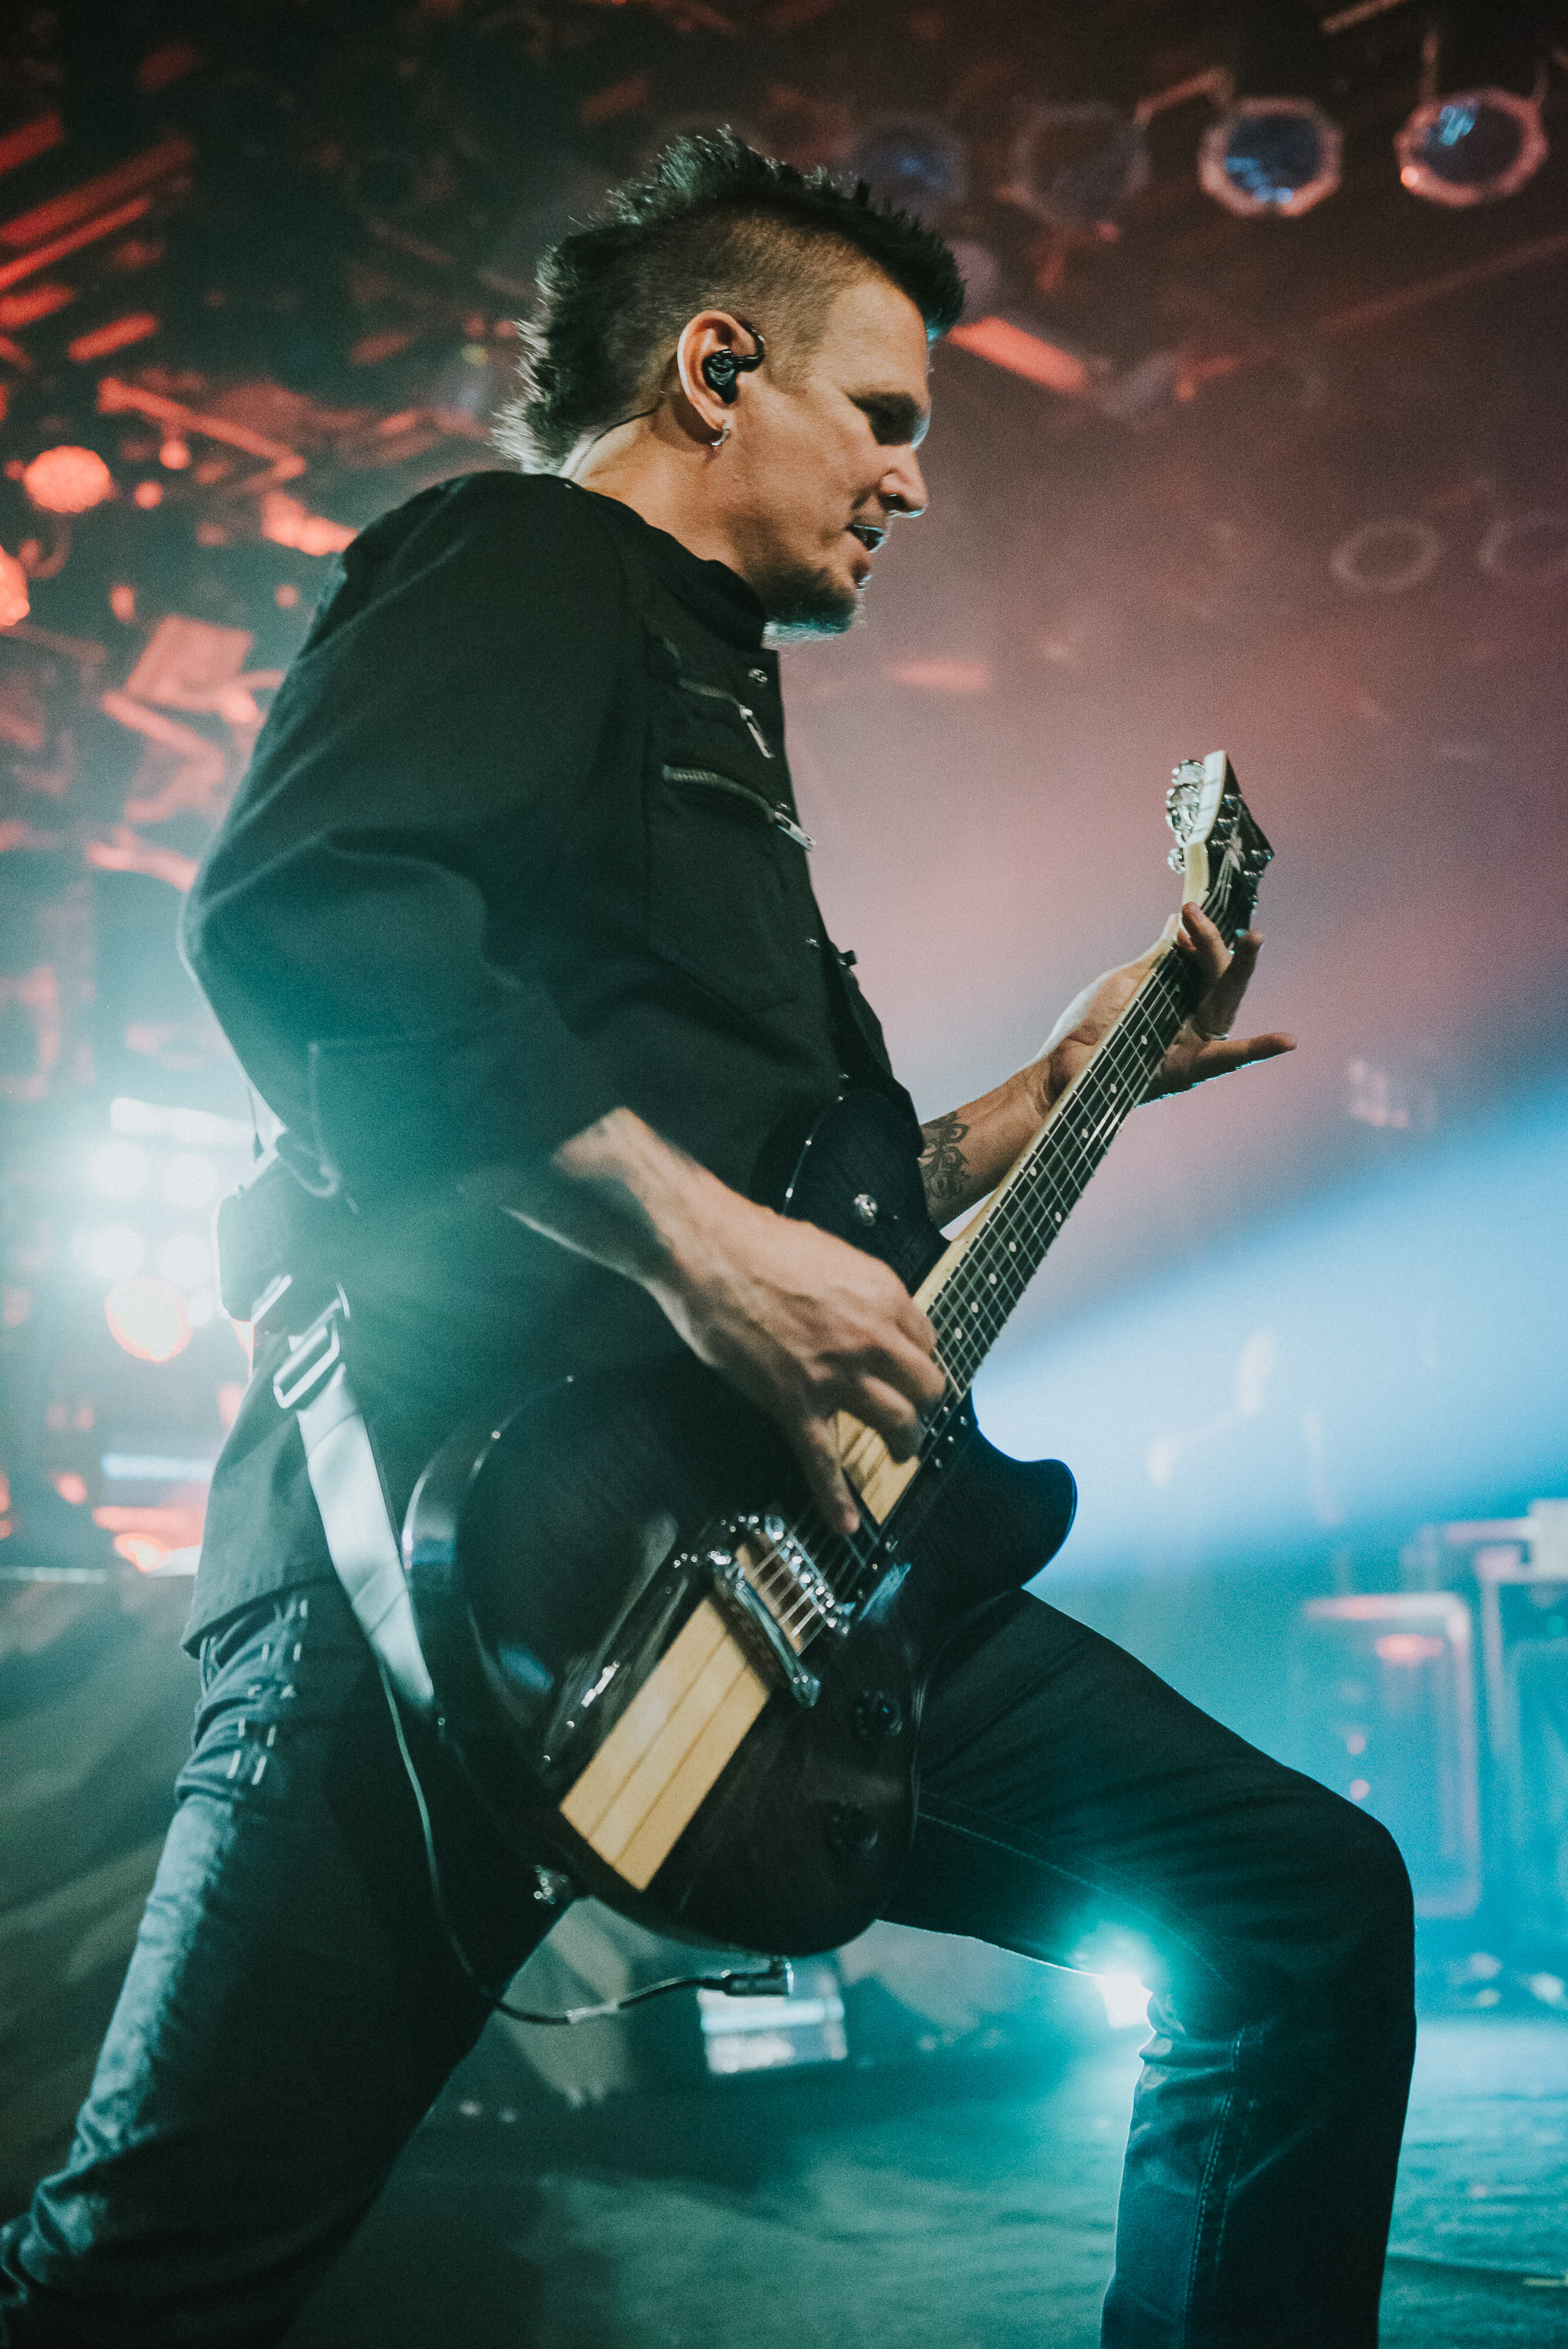 1_Disturbed_Commodore_Ballroom_Timothy-Nguyen_11March2016 (4 of 20).jpg